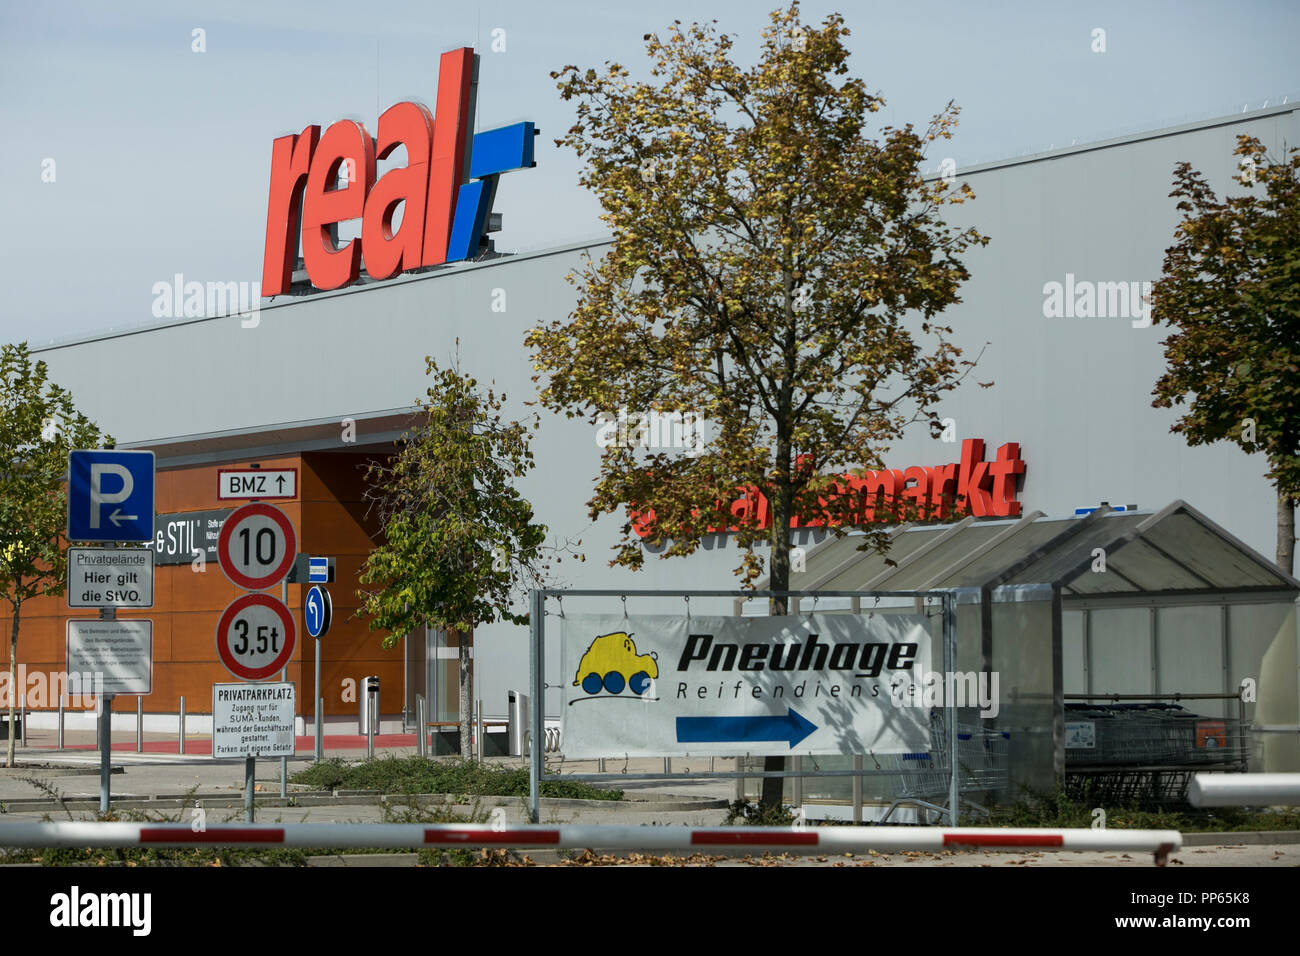 A logo sign outside of a Real (real,-) hypermarket retail store in Munich,  Germany, on September 9, 2018 Stock Photo - Alamy